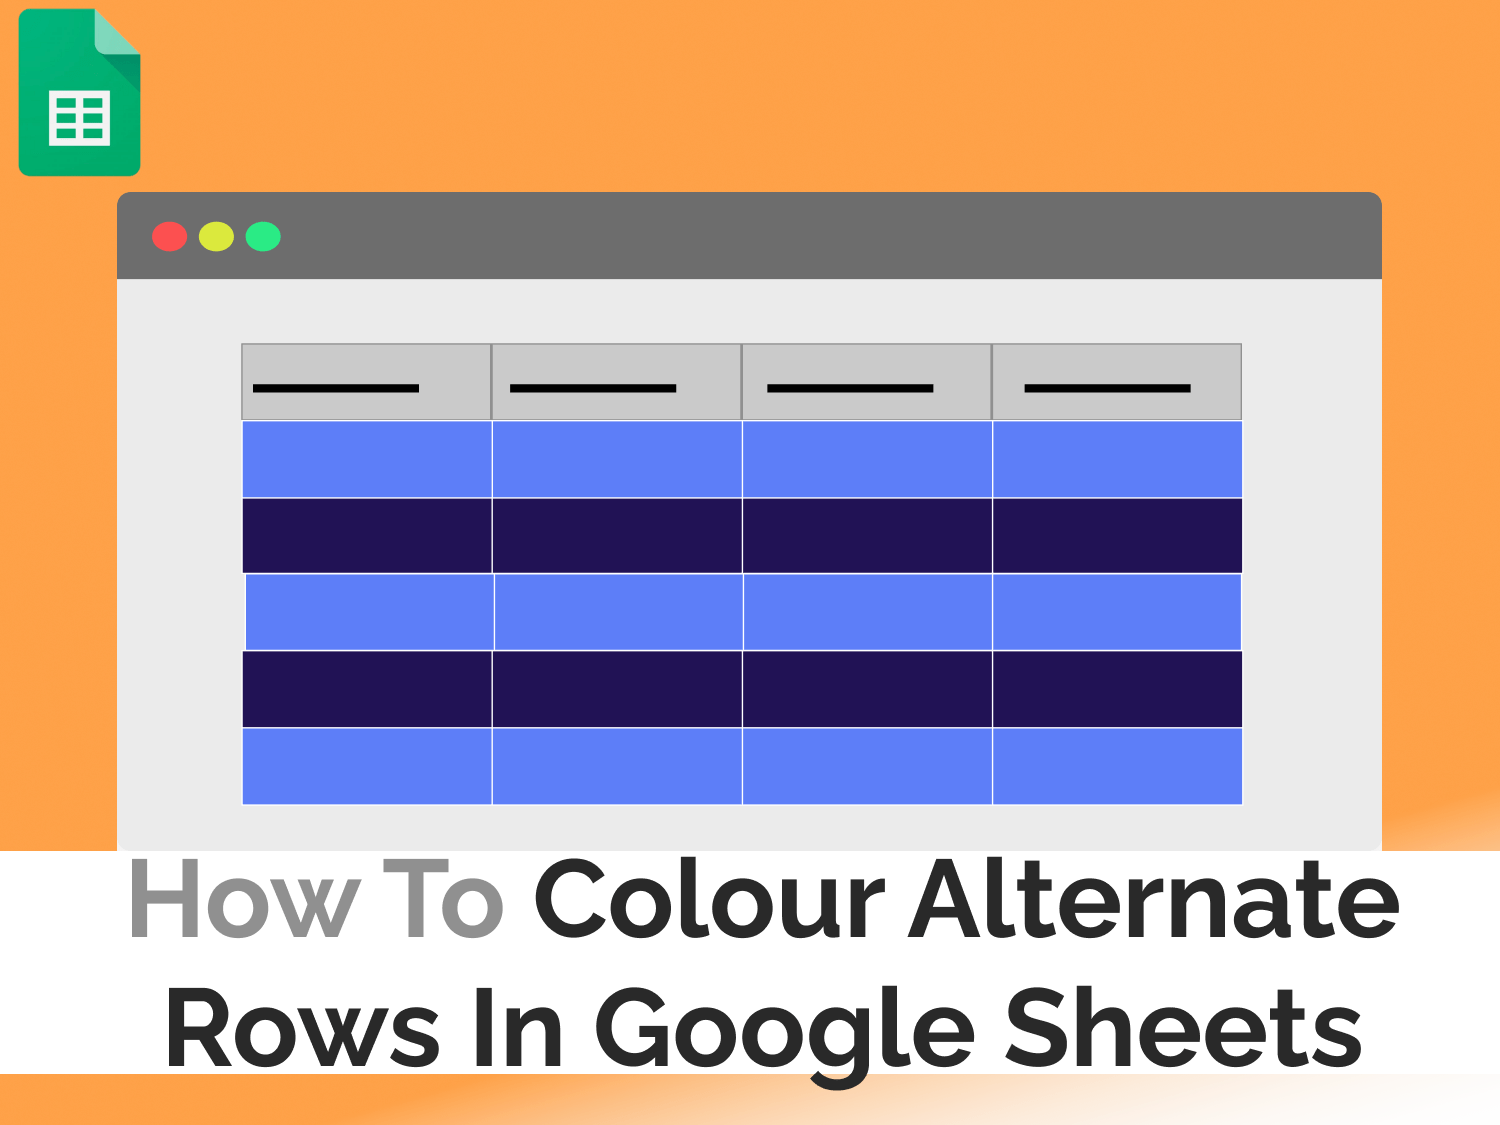 How to Colour Alternate Rows in Google Sheets